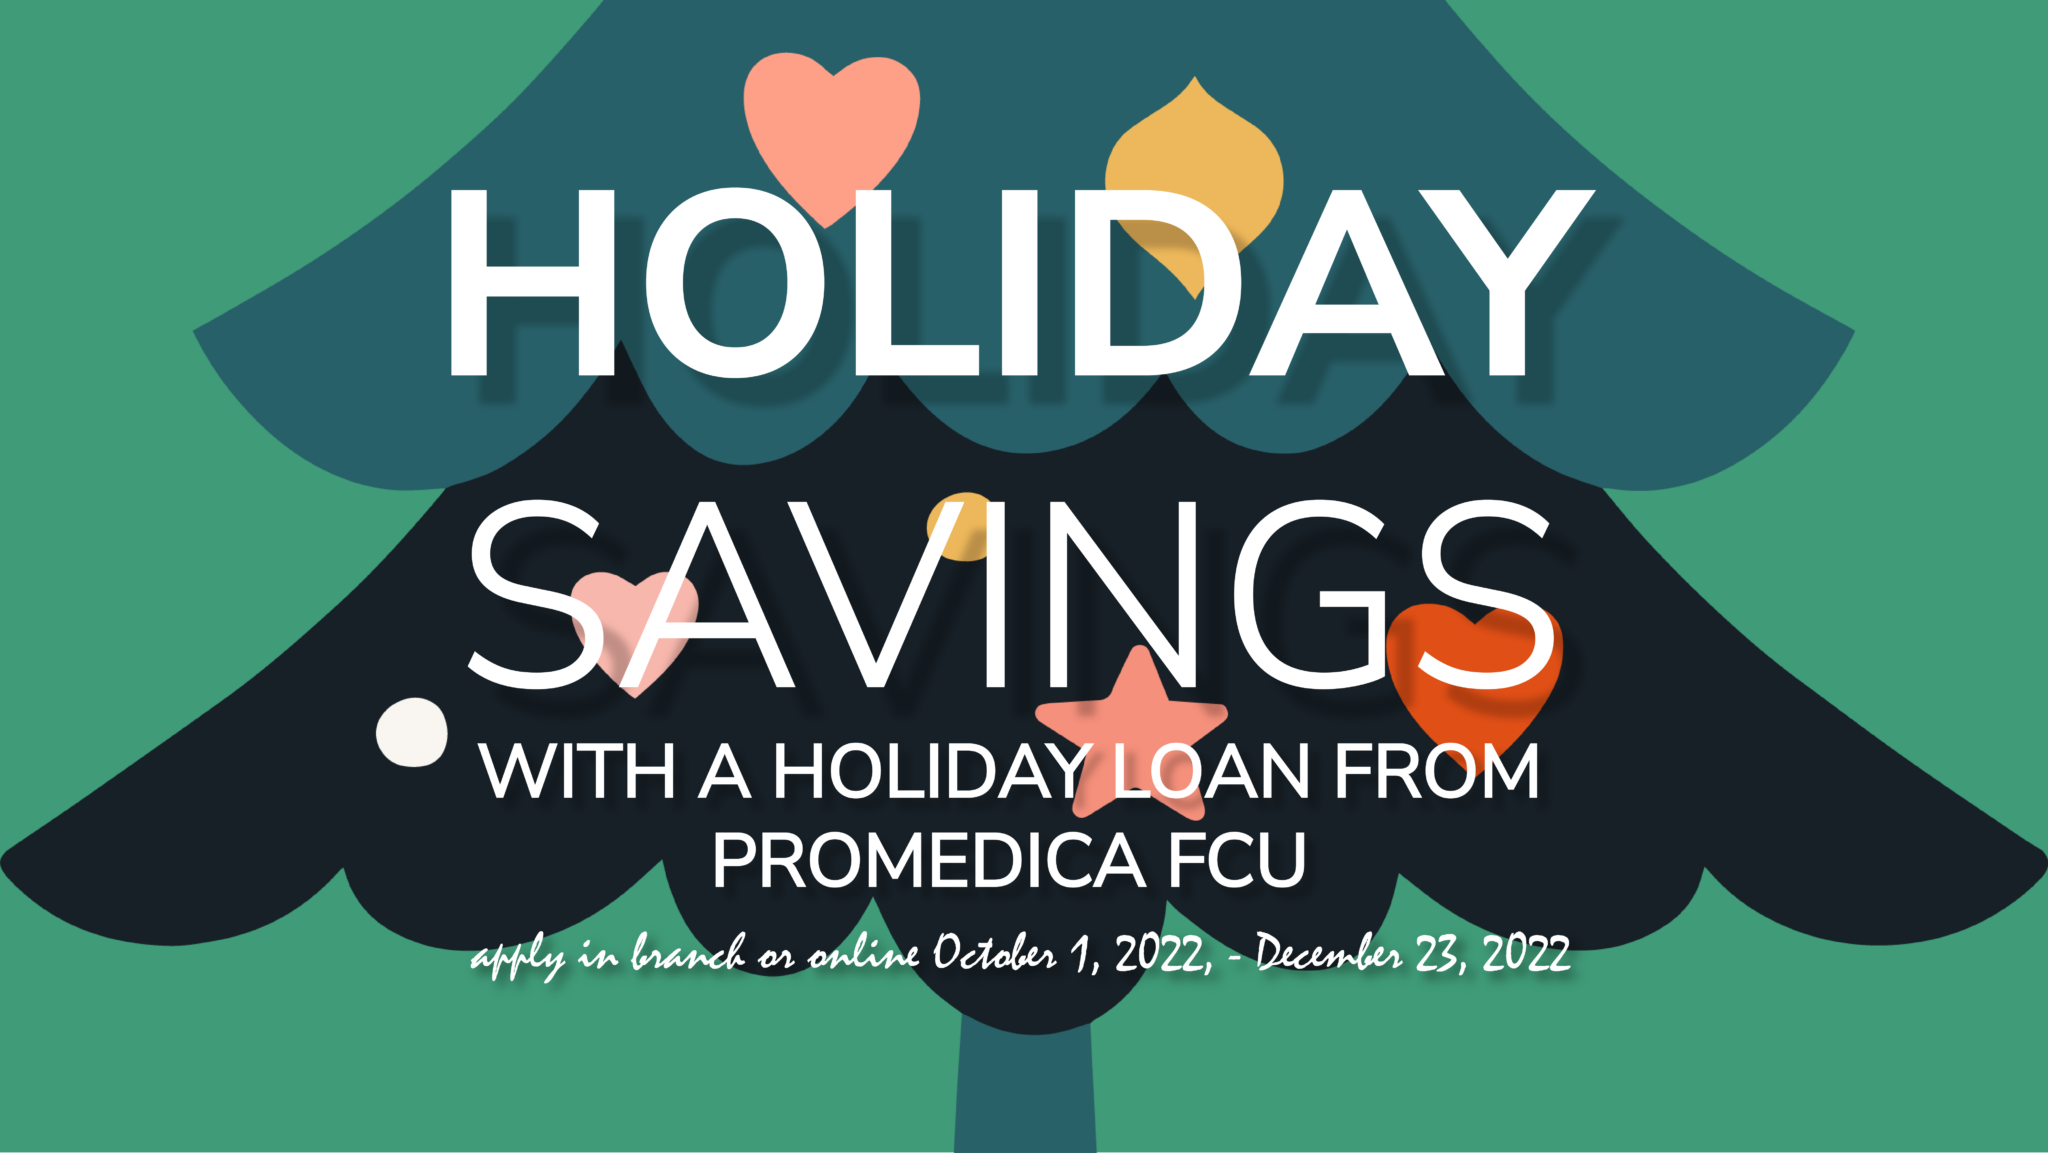 Save More This Season With a Holiday Loan From ProMedica FCU